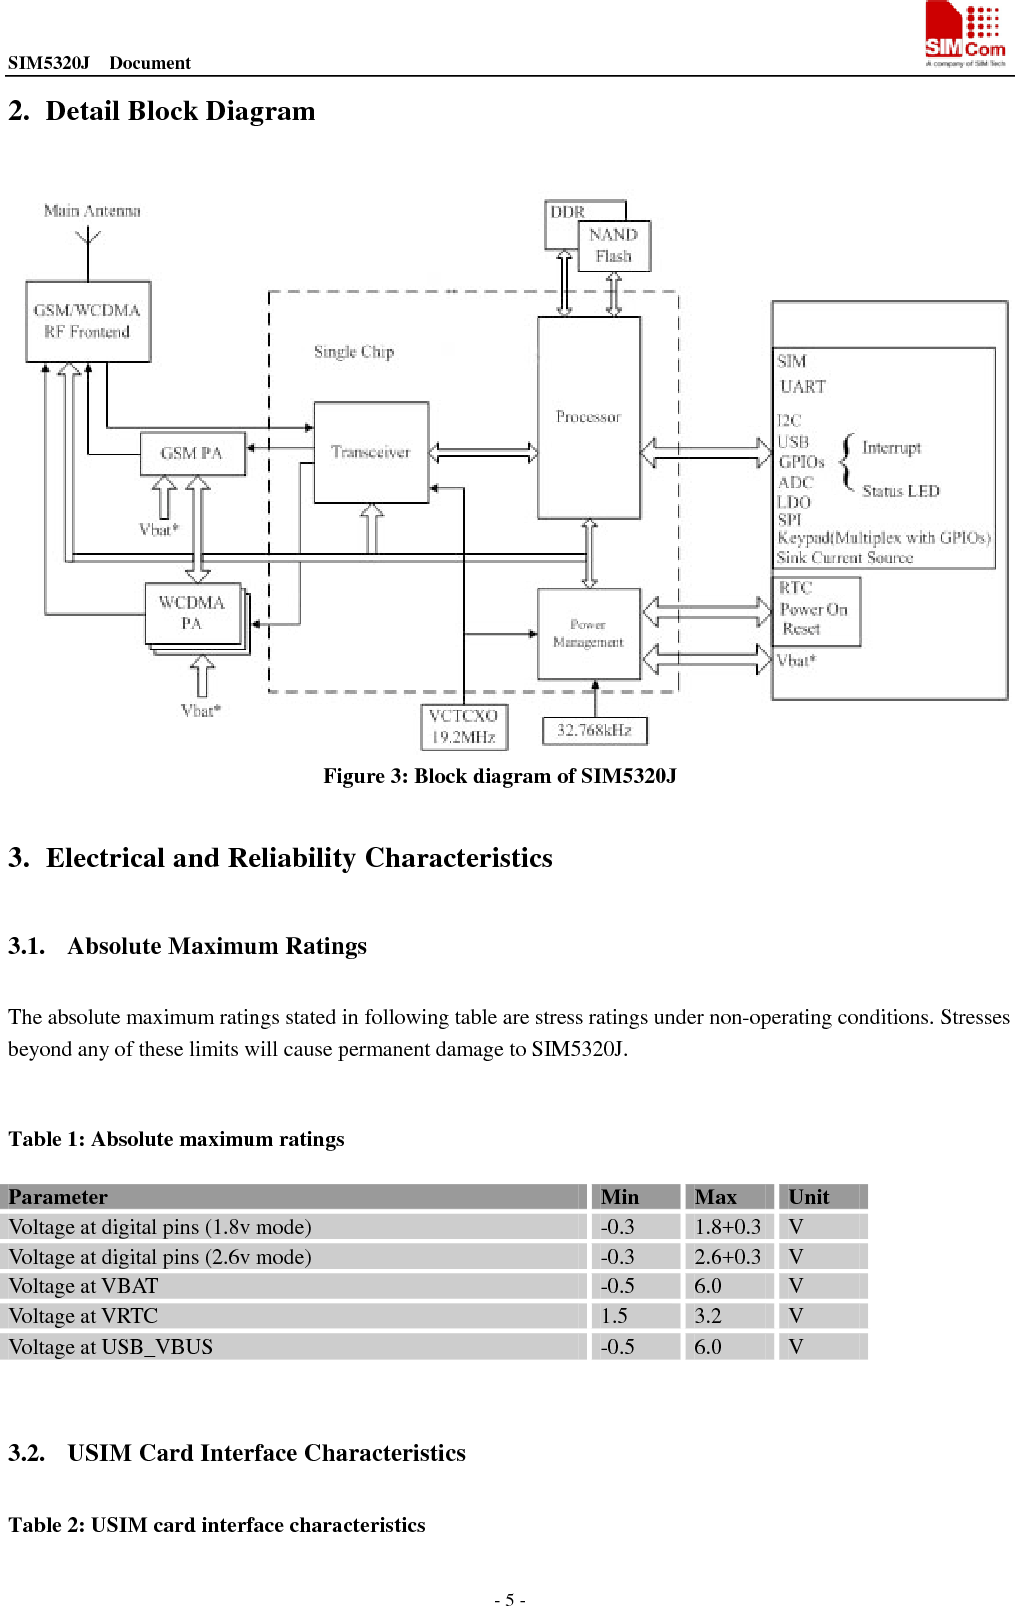 SIM5320J  Document                                                                                - 5 - 2. Detail Block Diagram  Figure 3: Block diagram of SIM5320J  3. Electrical and Reliability Characteristics 3.1. Absolute Maximum Ratings The absolute maximum ratings stated in following table are stress ratings under non-operating conditions. Stresses beyond any of these limits will cause permanent damage to SIM5320J.  Table 1: Absolute maximum ratings Parameter Min Max Unit Voltage at digital pins (1.8v mode) -0.3 1.8+0.3 V Voltage at digital pins (2.6v mode) -0.3 2.6+0.3 V Voltage at VBAT -0.5 6.0 V Voltage at VRTC 1.5 3.2 V Voltage at USB_VBUS -0.5 6.0 V  3.2. USIM Card Interface Characteristics Table 2: USIM card interface characteristics 